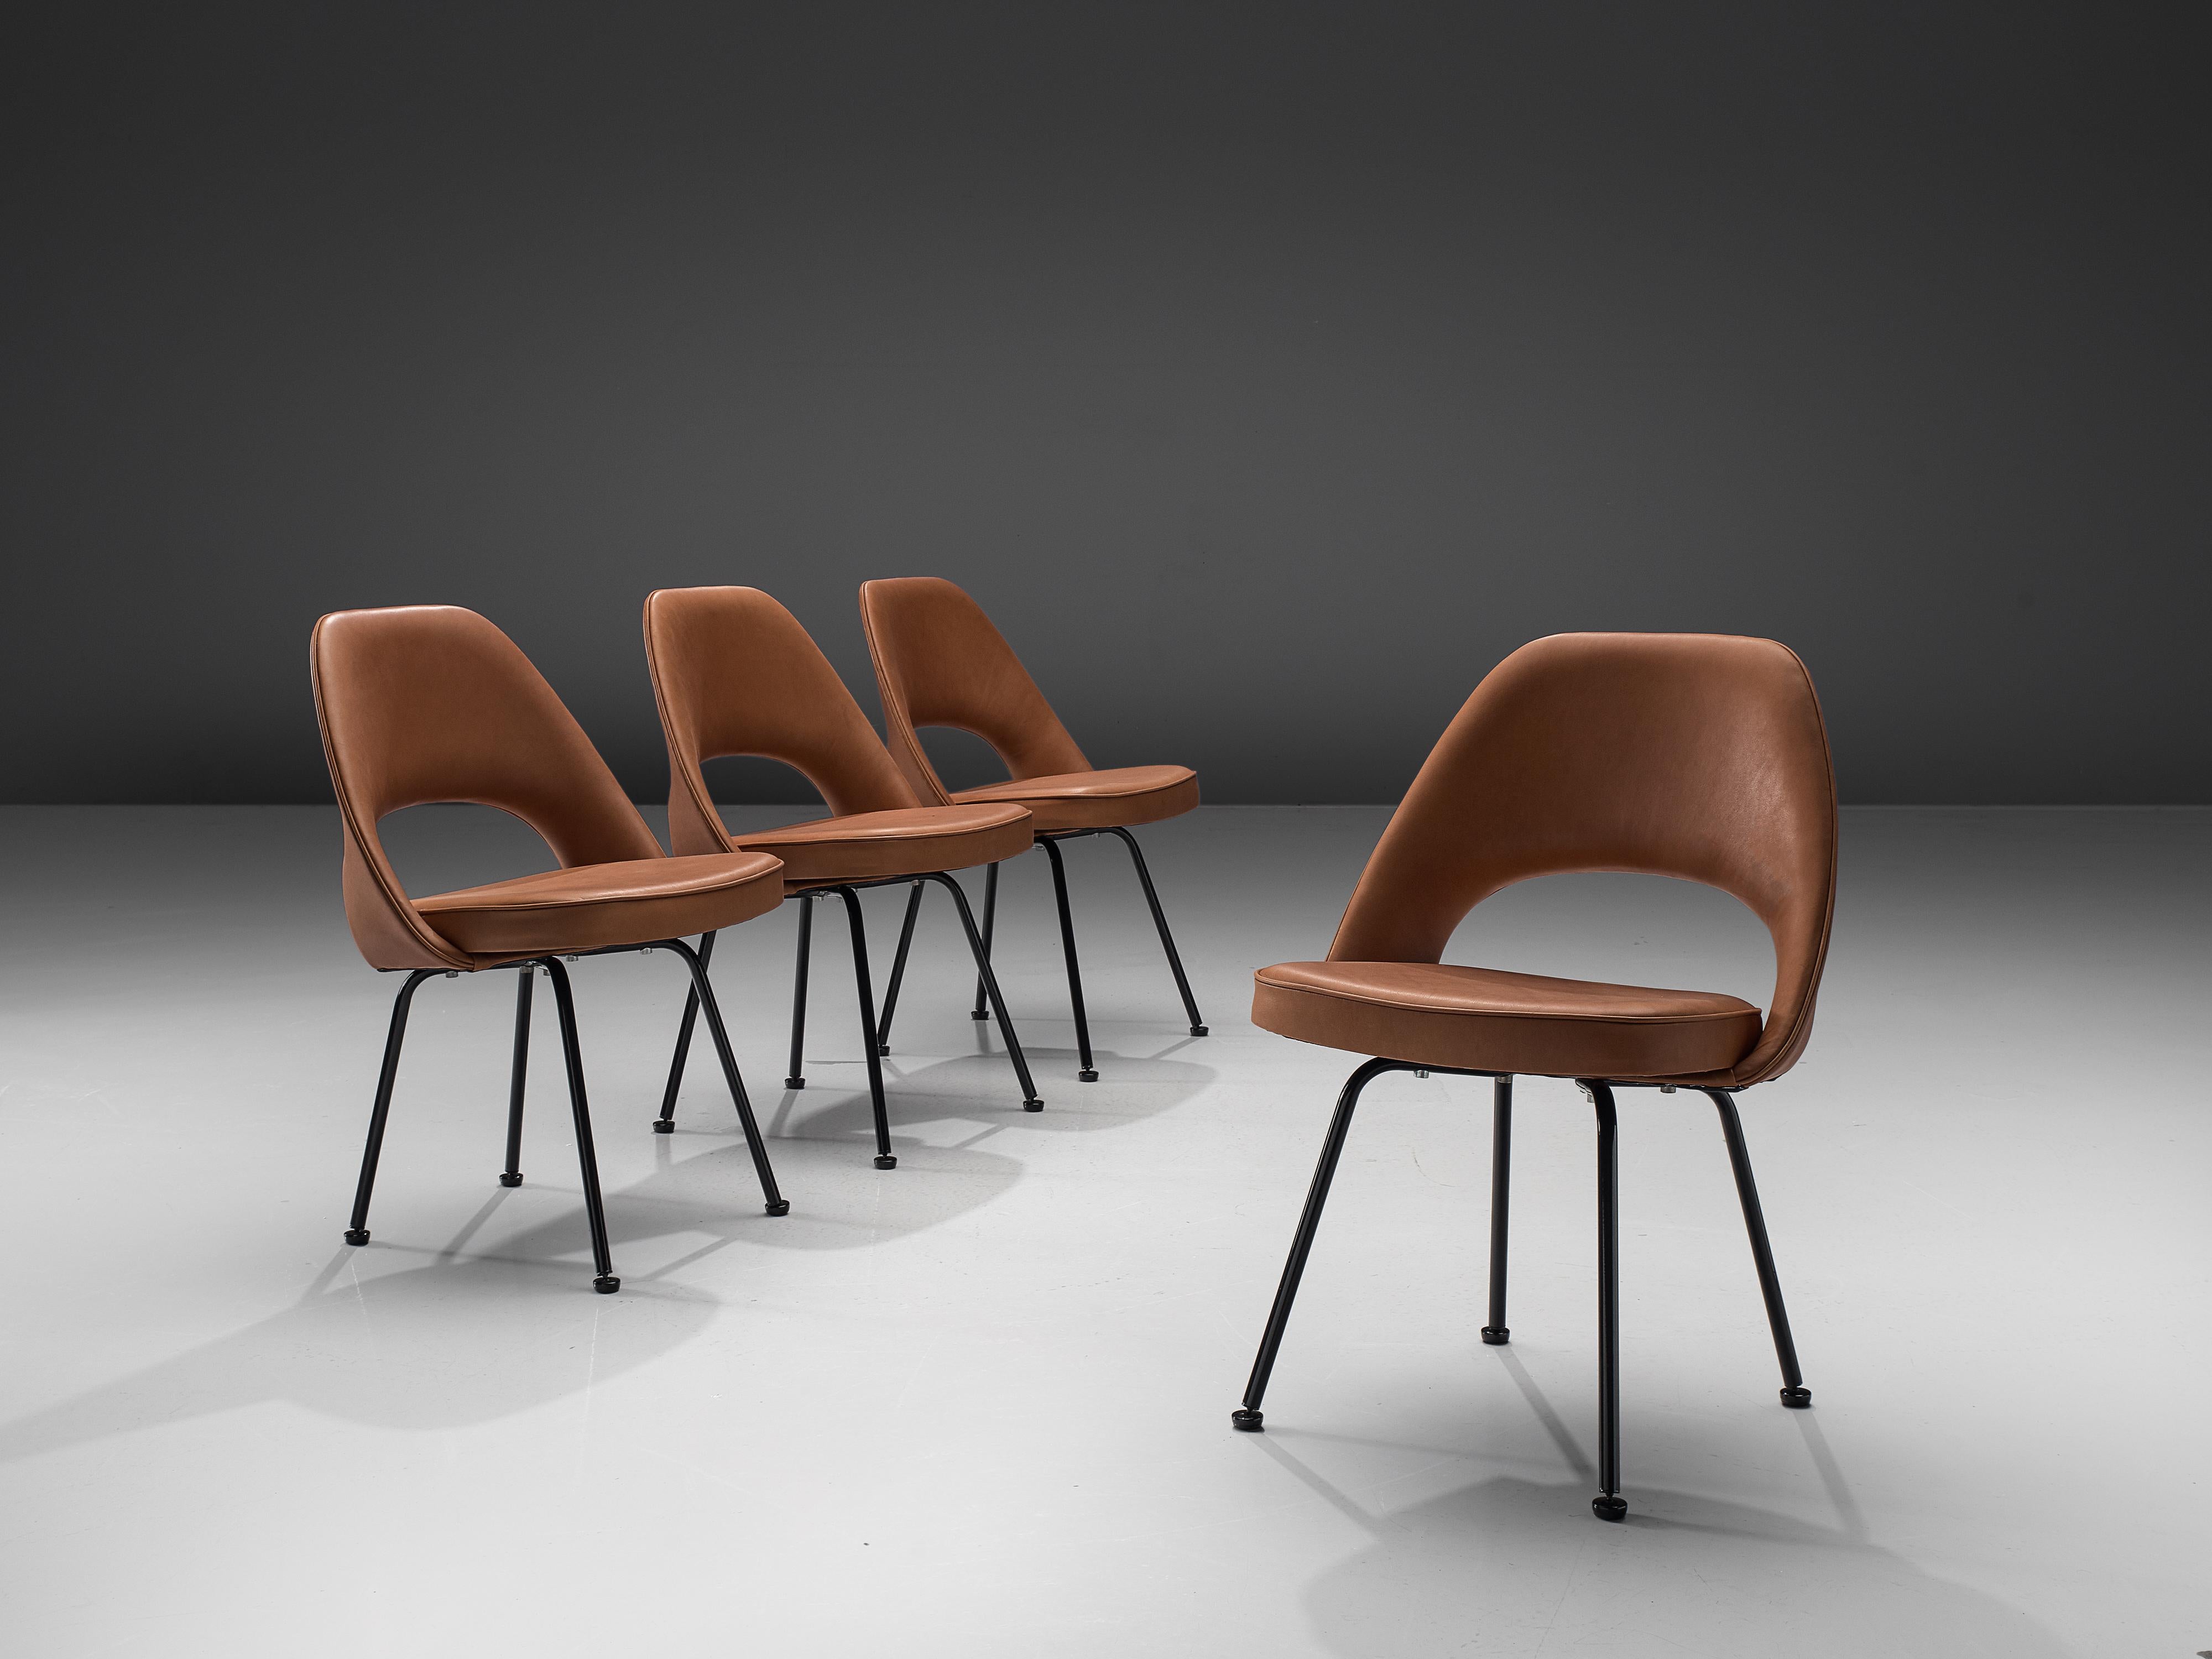 Eero Saarinen for Knoll International, reupholstered chairs model 72, metal, brown leather, United States, designed 1948

Organic shaped chairs designed by Eero Saarinen. This iconic model is reupholstered in brown leather that combines beautifully